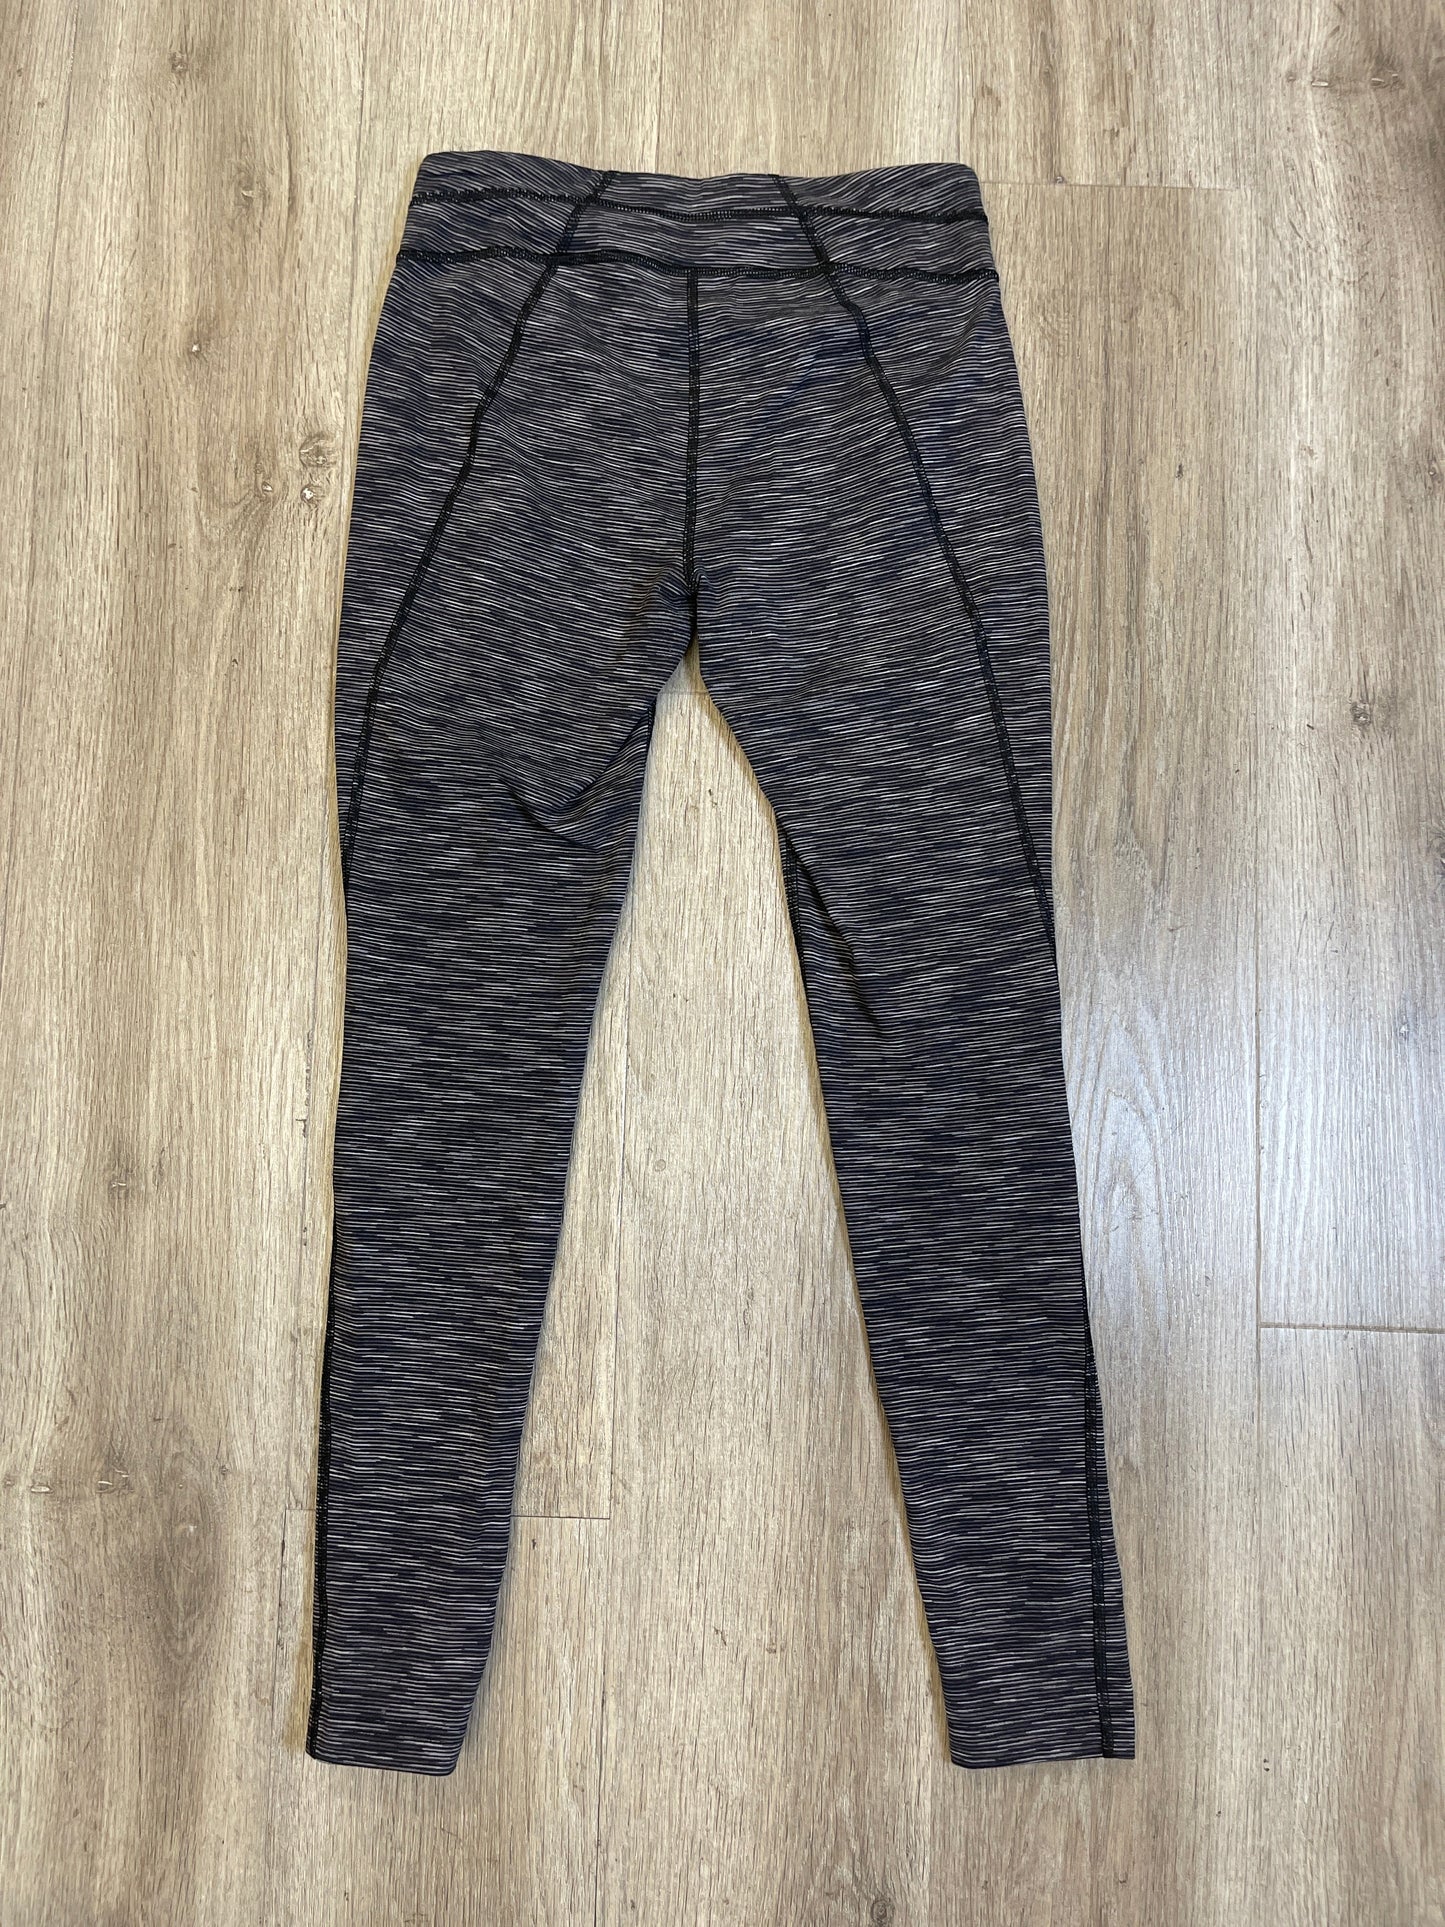 Athletic Leggings By Lucy  Size: M